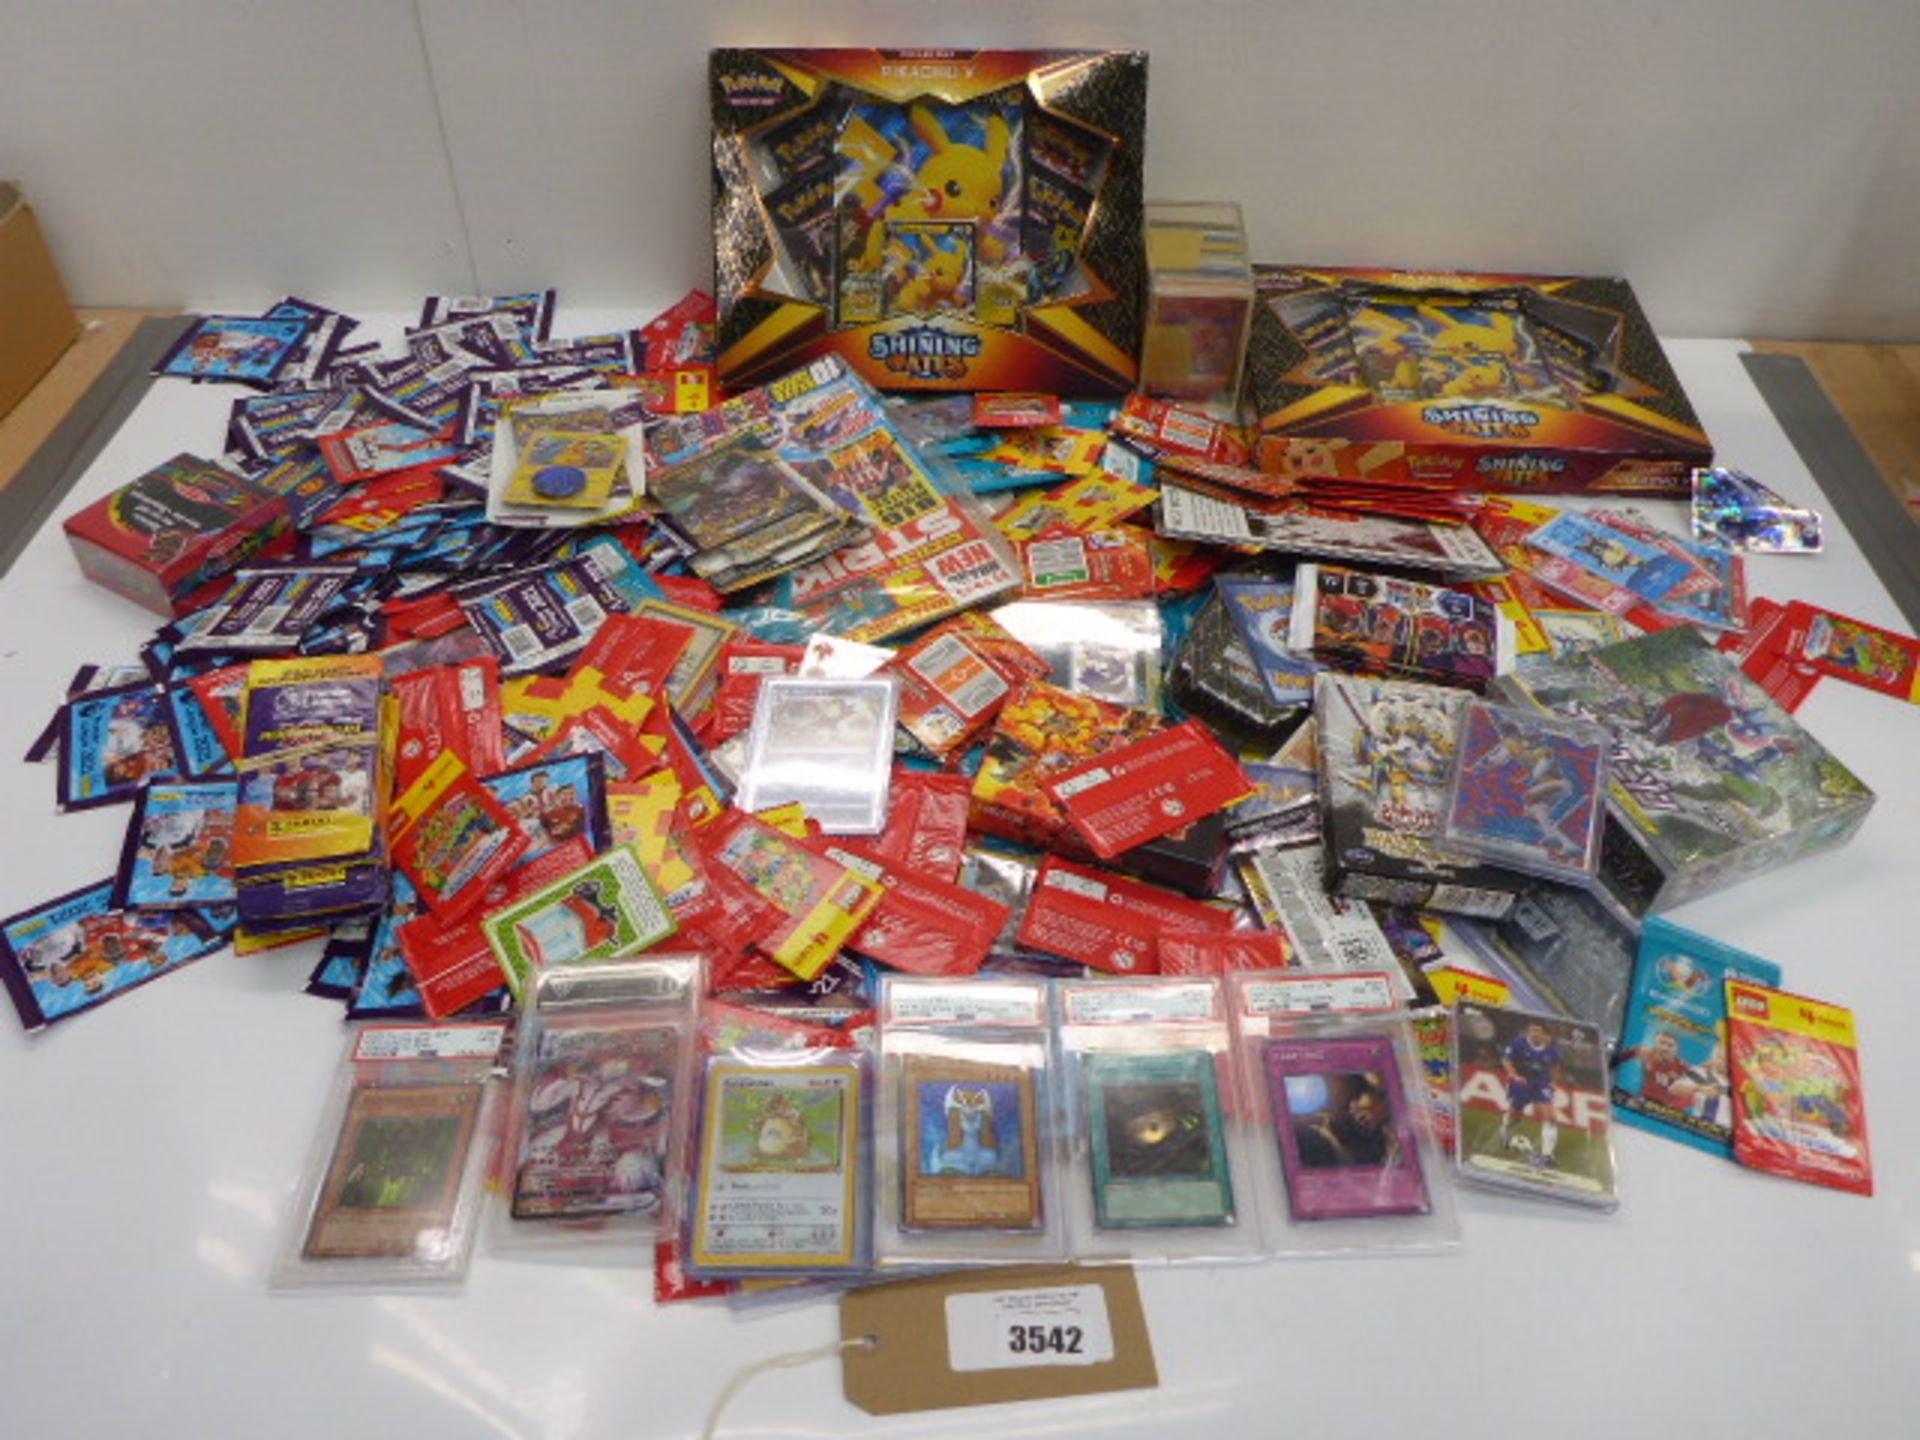 Large selection of collectable trading cards including Yu-Gi-Oh!, Pokemon, Pro Bowl, Panini, Lego